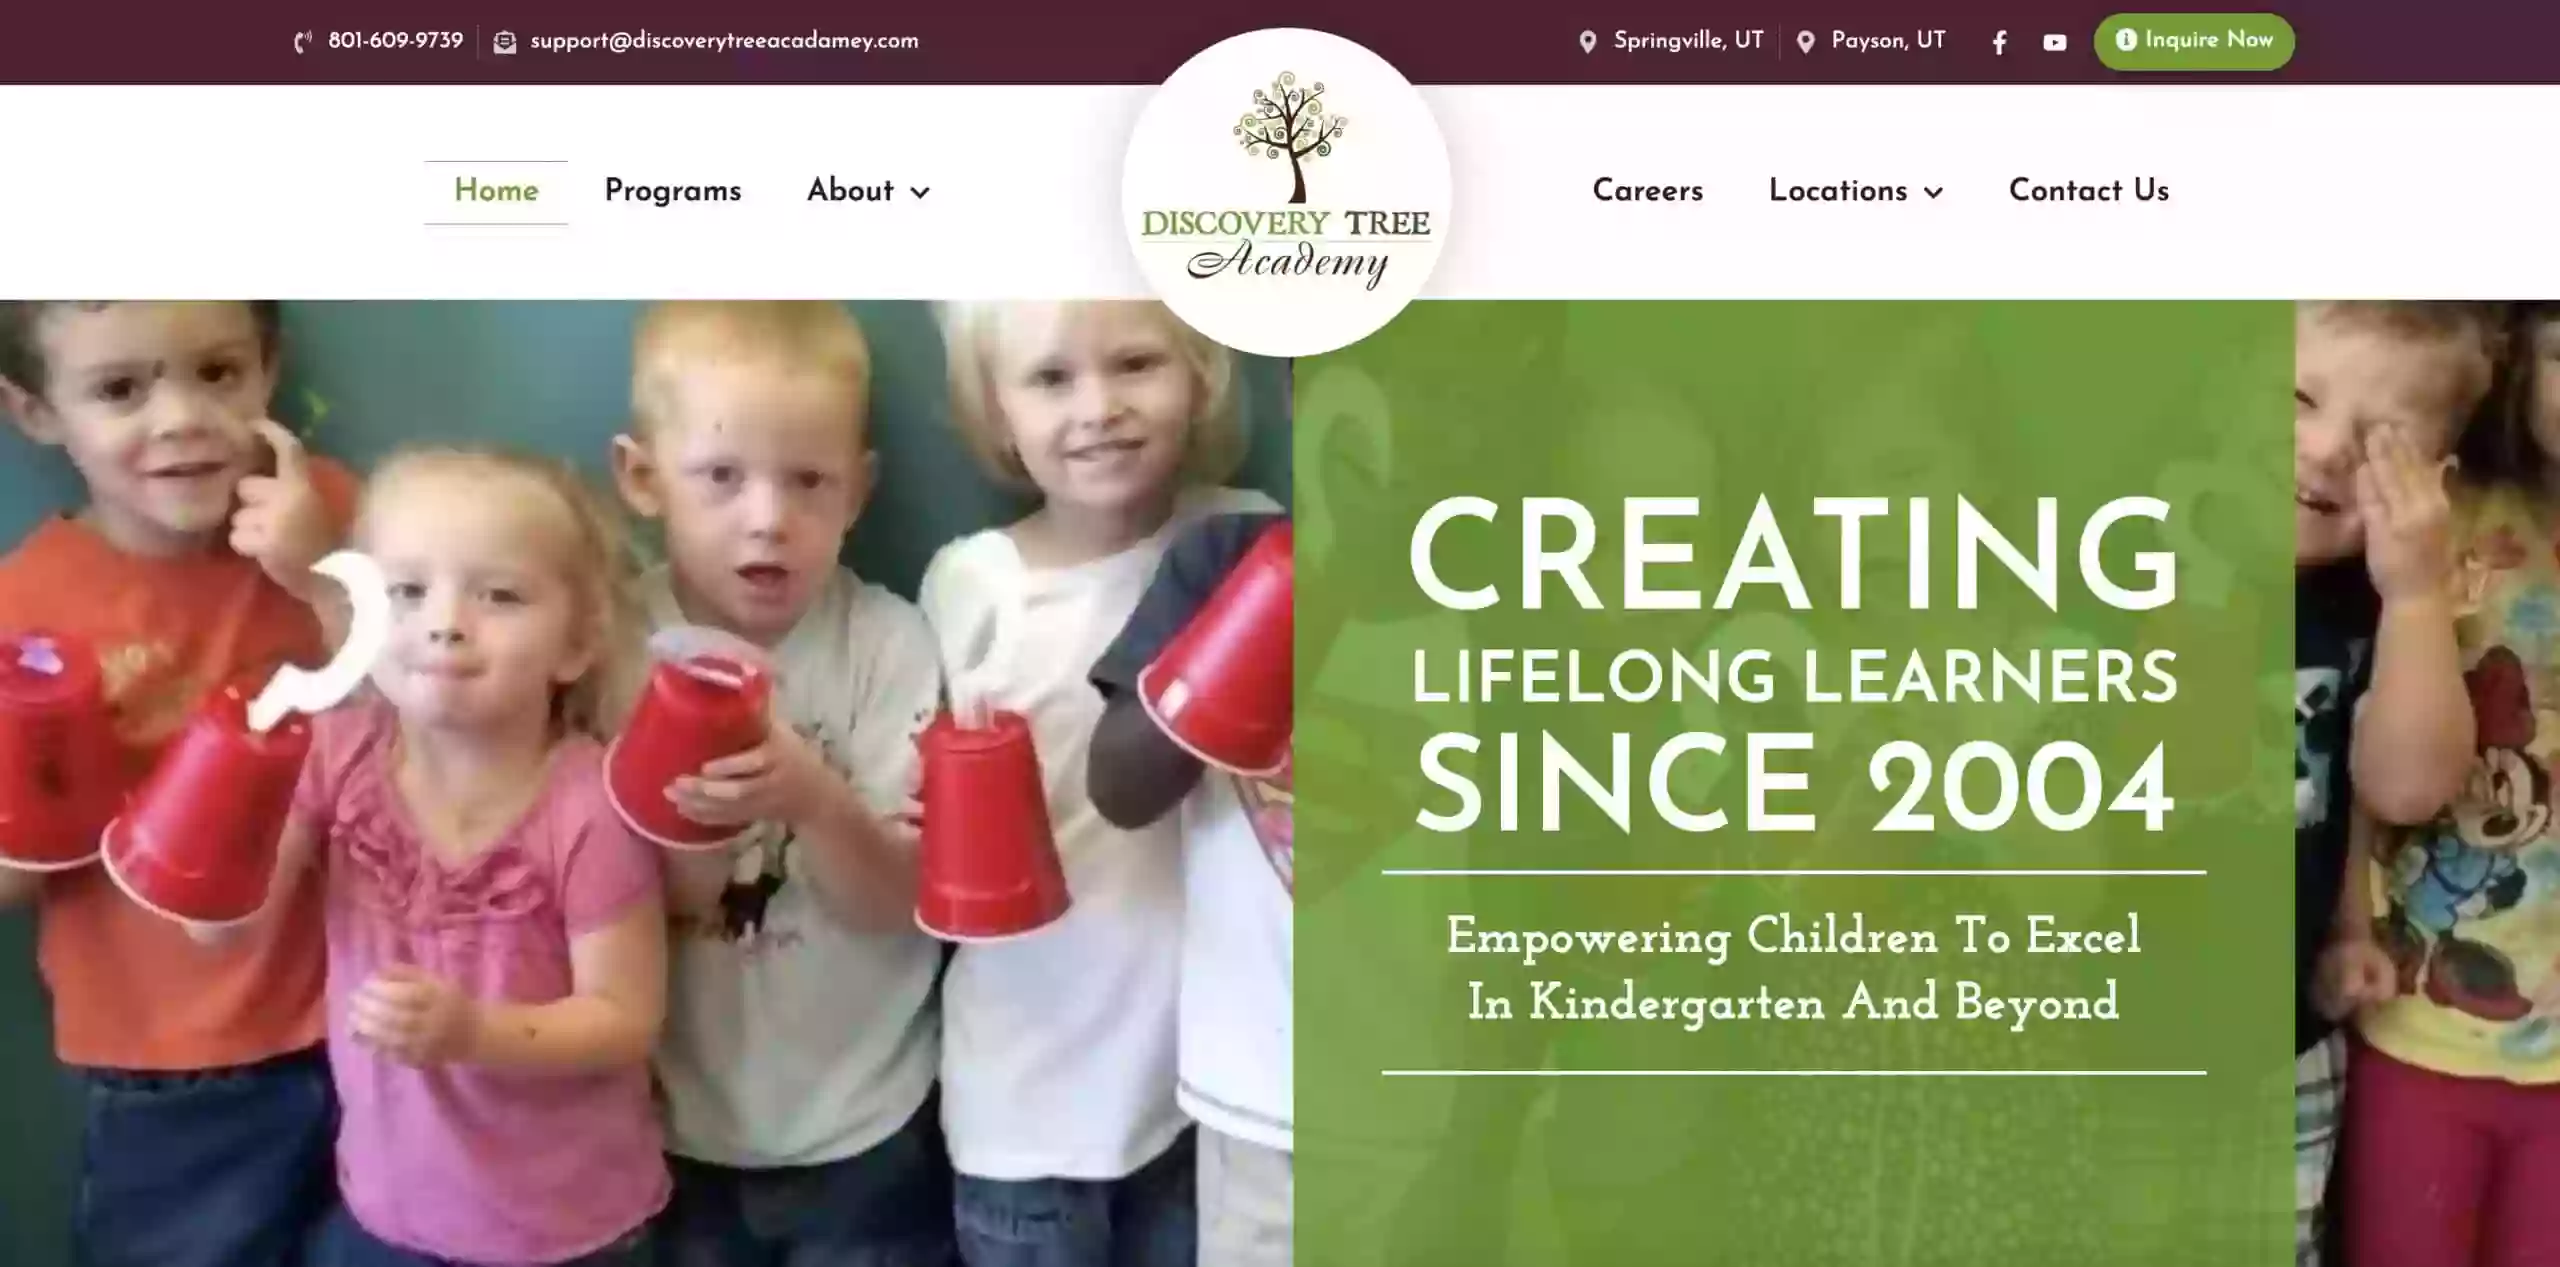 Discovery Tree Academy - Payson